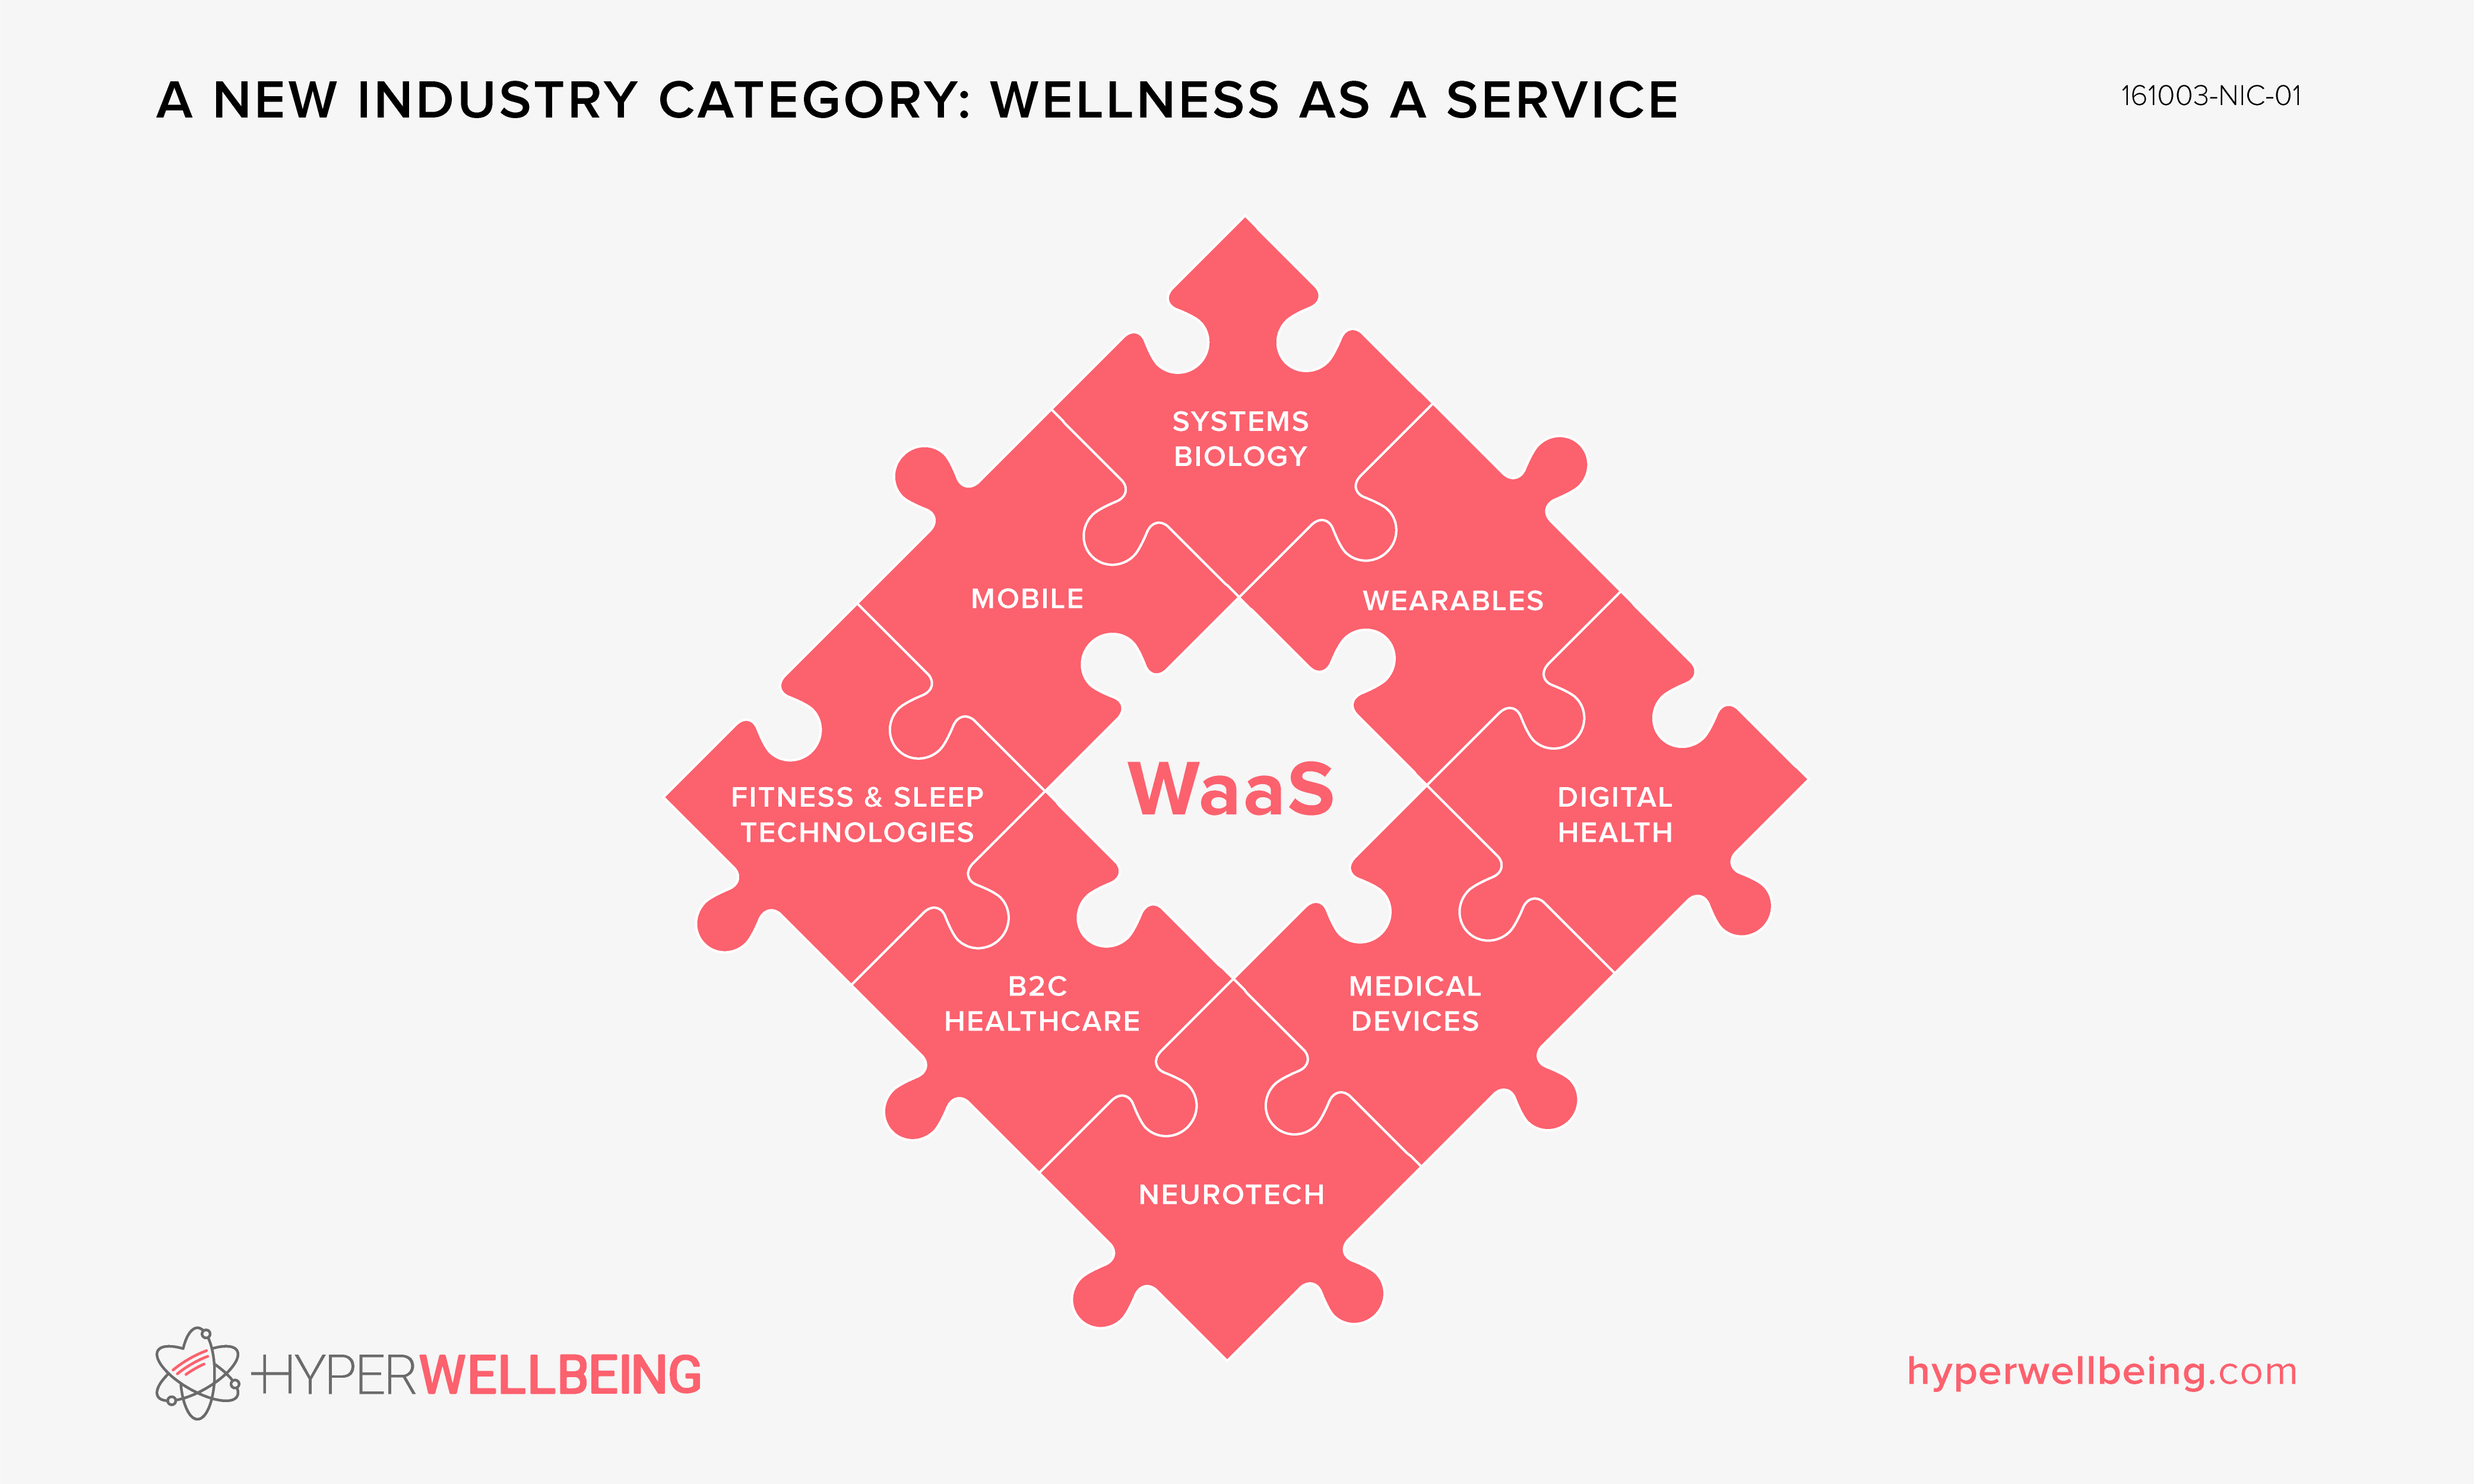 A New Industry Category: Wellness as a Service